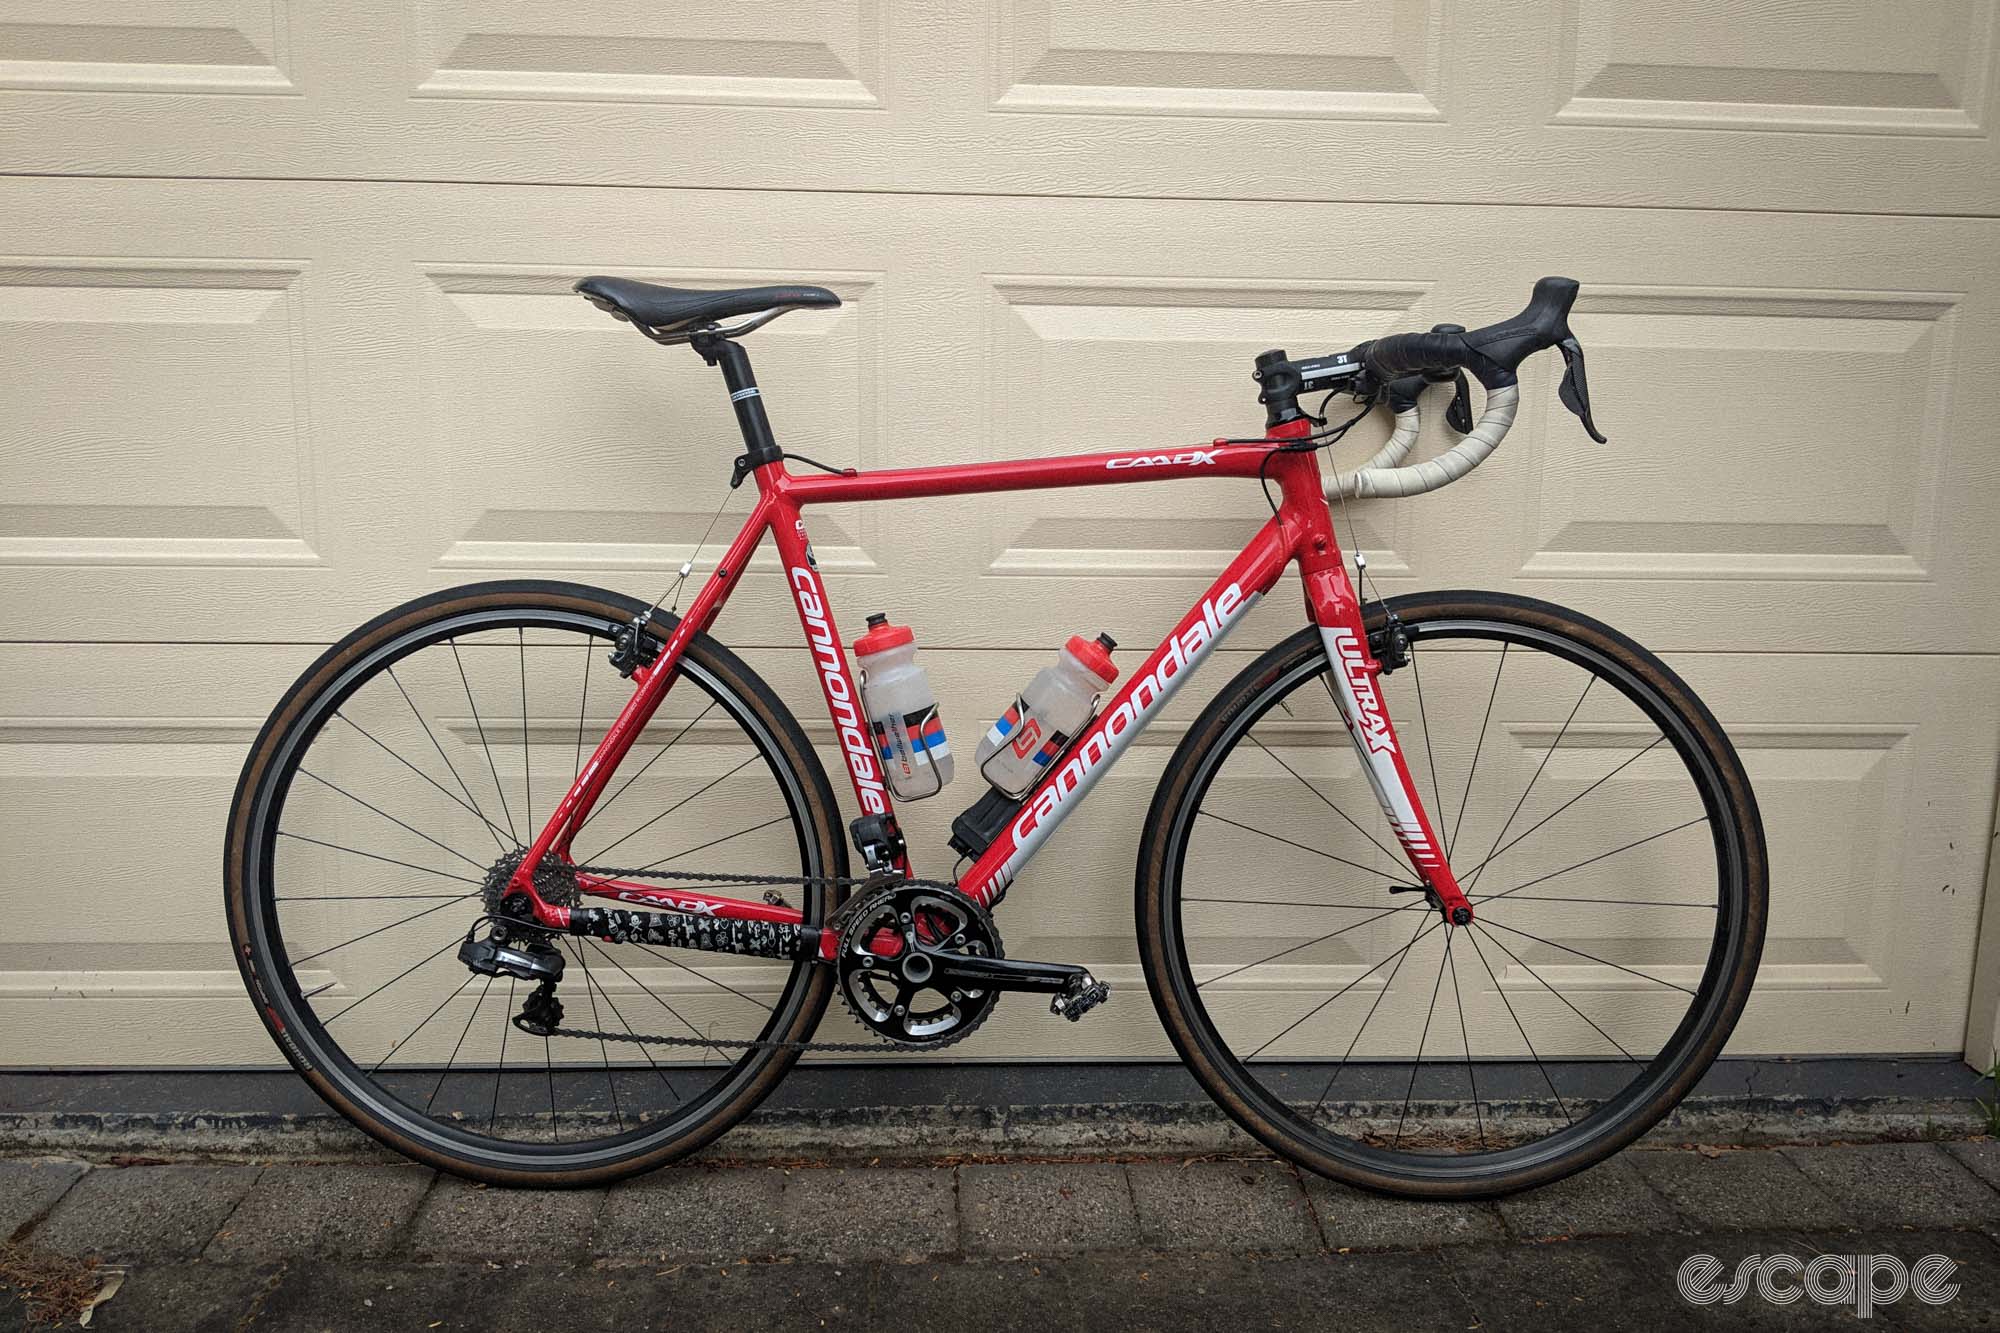 Red Cannondale CAADX leaning against a garage door, with Dura Ace Di2 groupset, cantilever brakes, skinny tyres. 